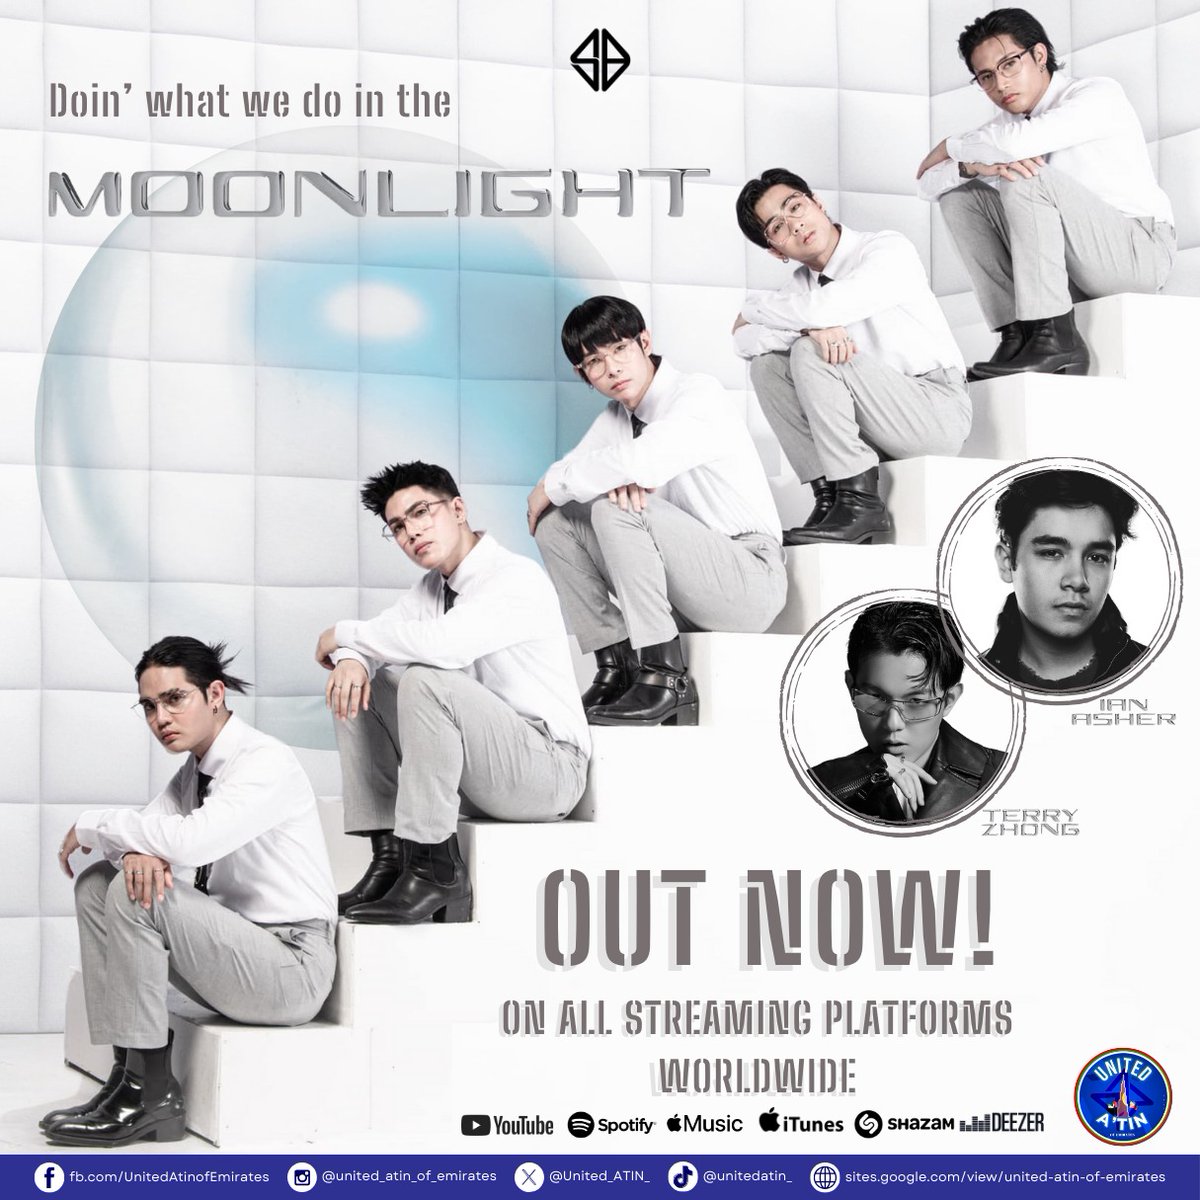 It's finally out now in UAE!🇦🇪 LEZZGO A'TIN! LET'S STREAM 'MOONLIGHT' Out now in all music platforms! ❗️Remember A'tin in UAE - mass purchase in Itunes later at 8AM! ⚪️ 'MOONLIGHT' OUT NOW by Ian Asher, SB19, Terry Zhong Listen here: 🔗 orcd.co/inthemoonlight Official…